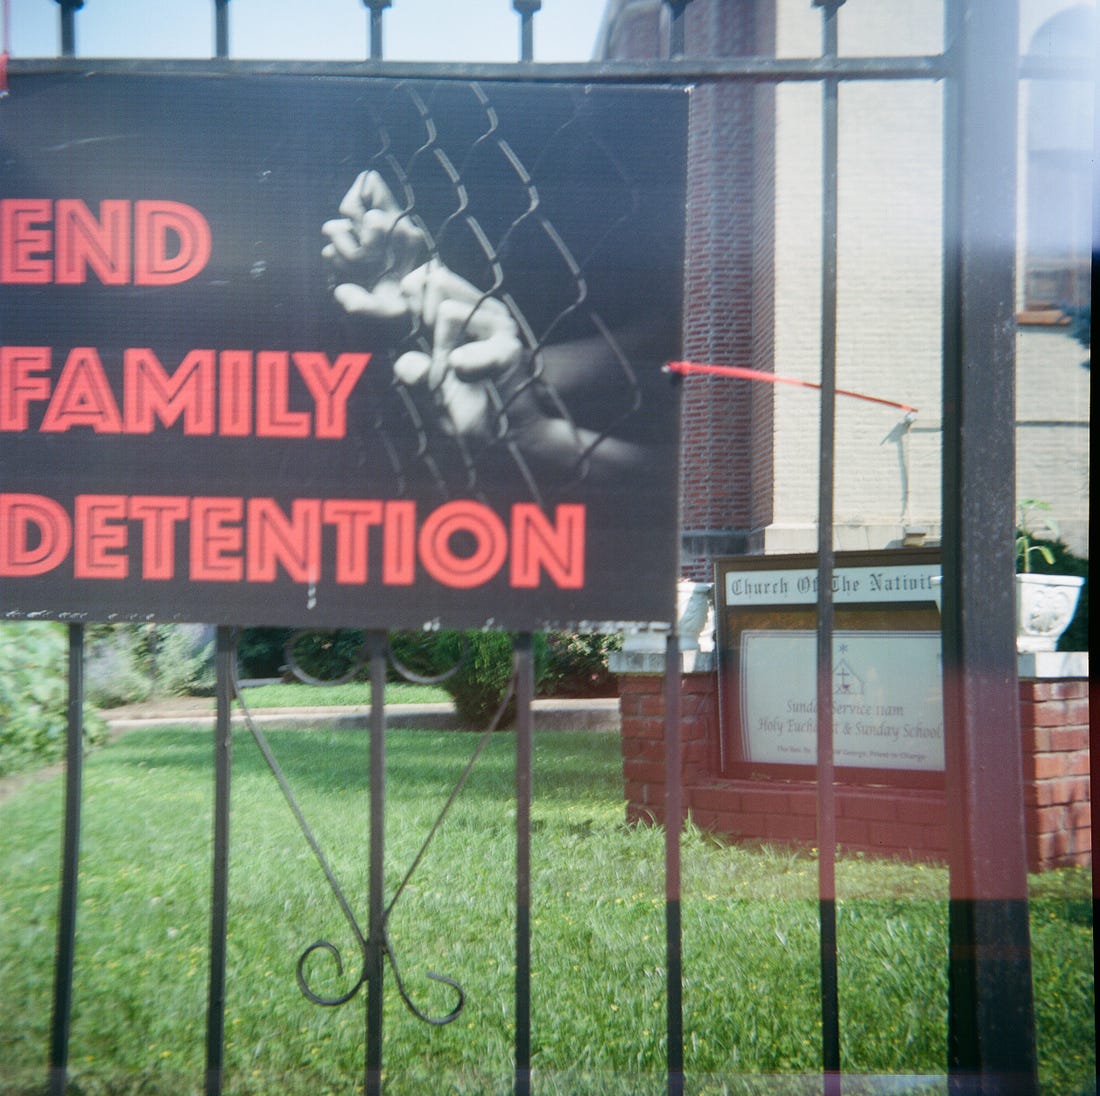 A sign that says "End Family Detention" on the fence at the Church of the Nativity in Flatbush, Brooklyn